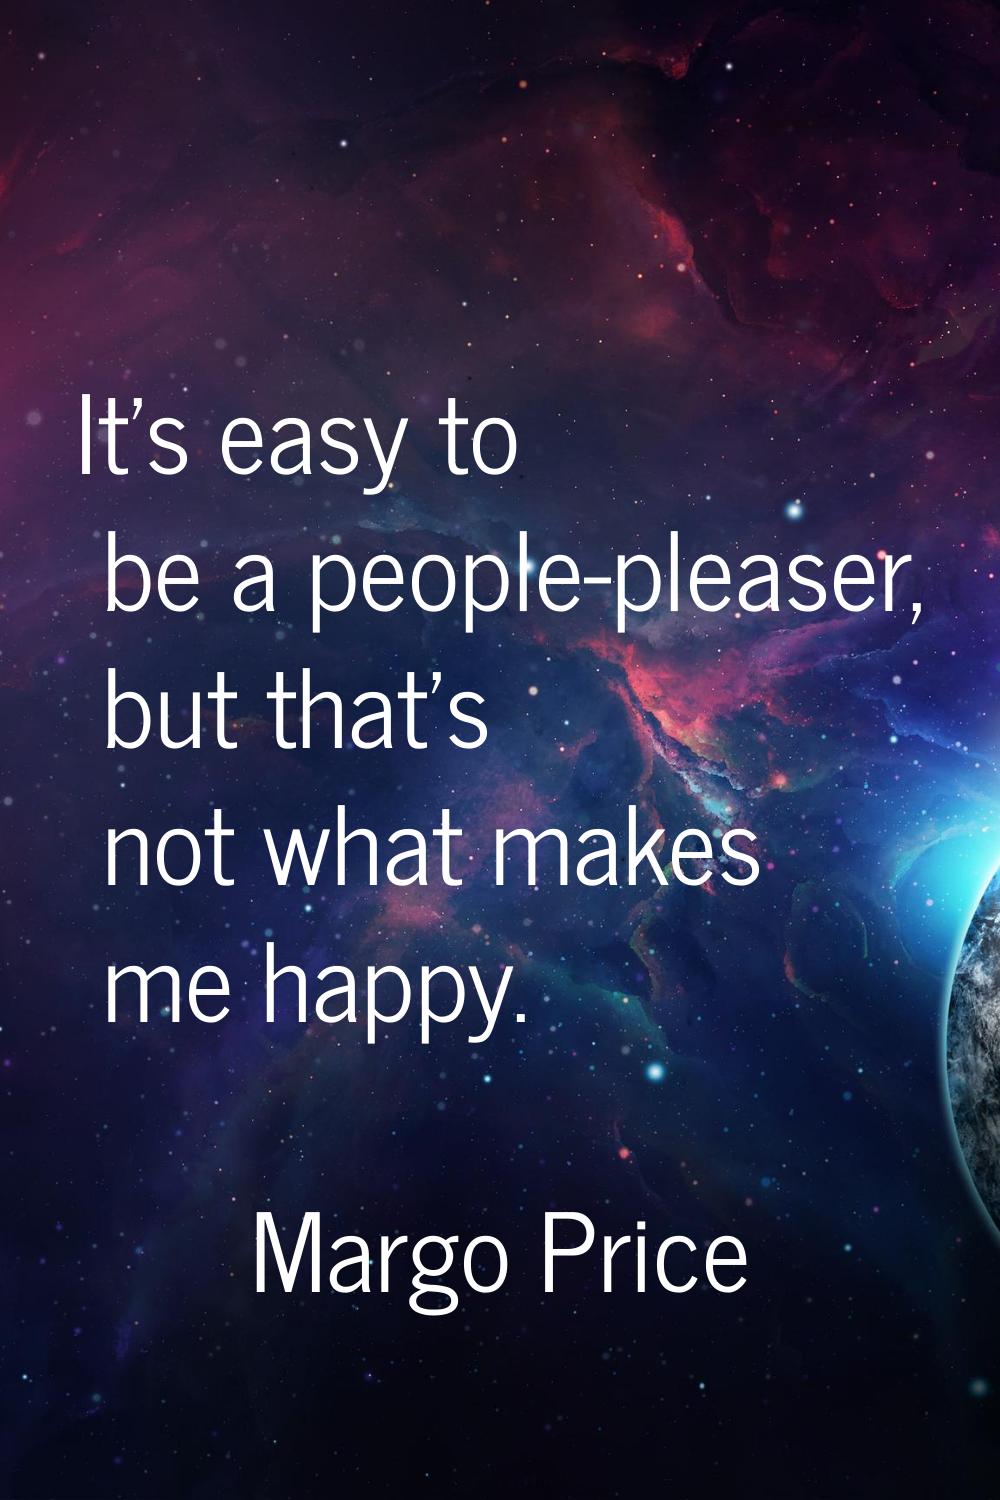 It's easy to be a people-pleaser, but that's not what makes me happy.